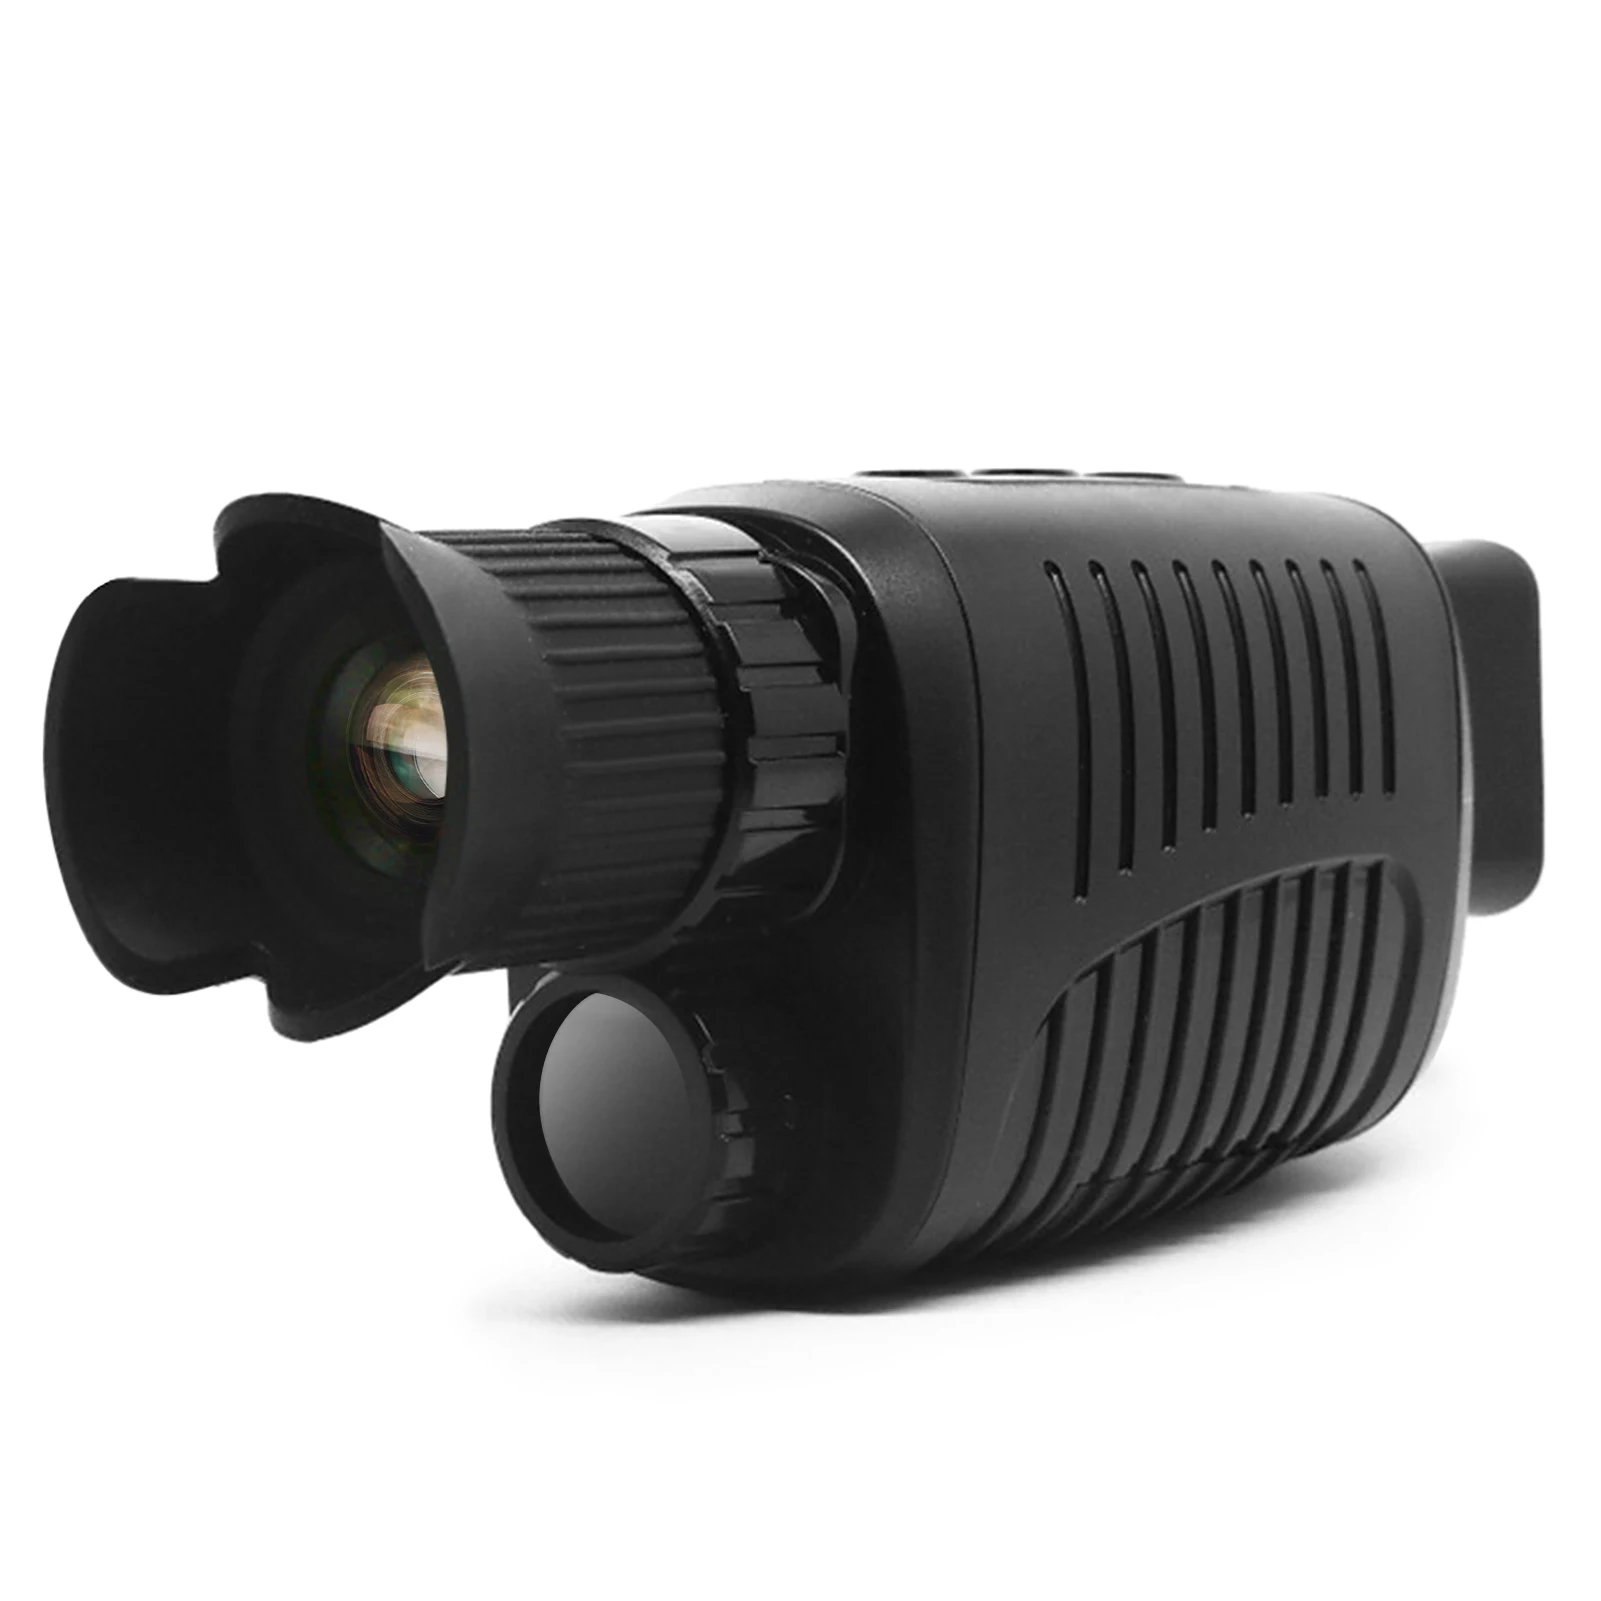 1080P Digital High Definition Infrared Night Vision Monocular 5X Digital Zoom Full Colored Vision with 1.5'' Display Screen